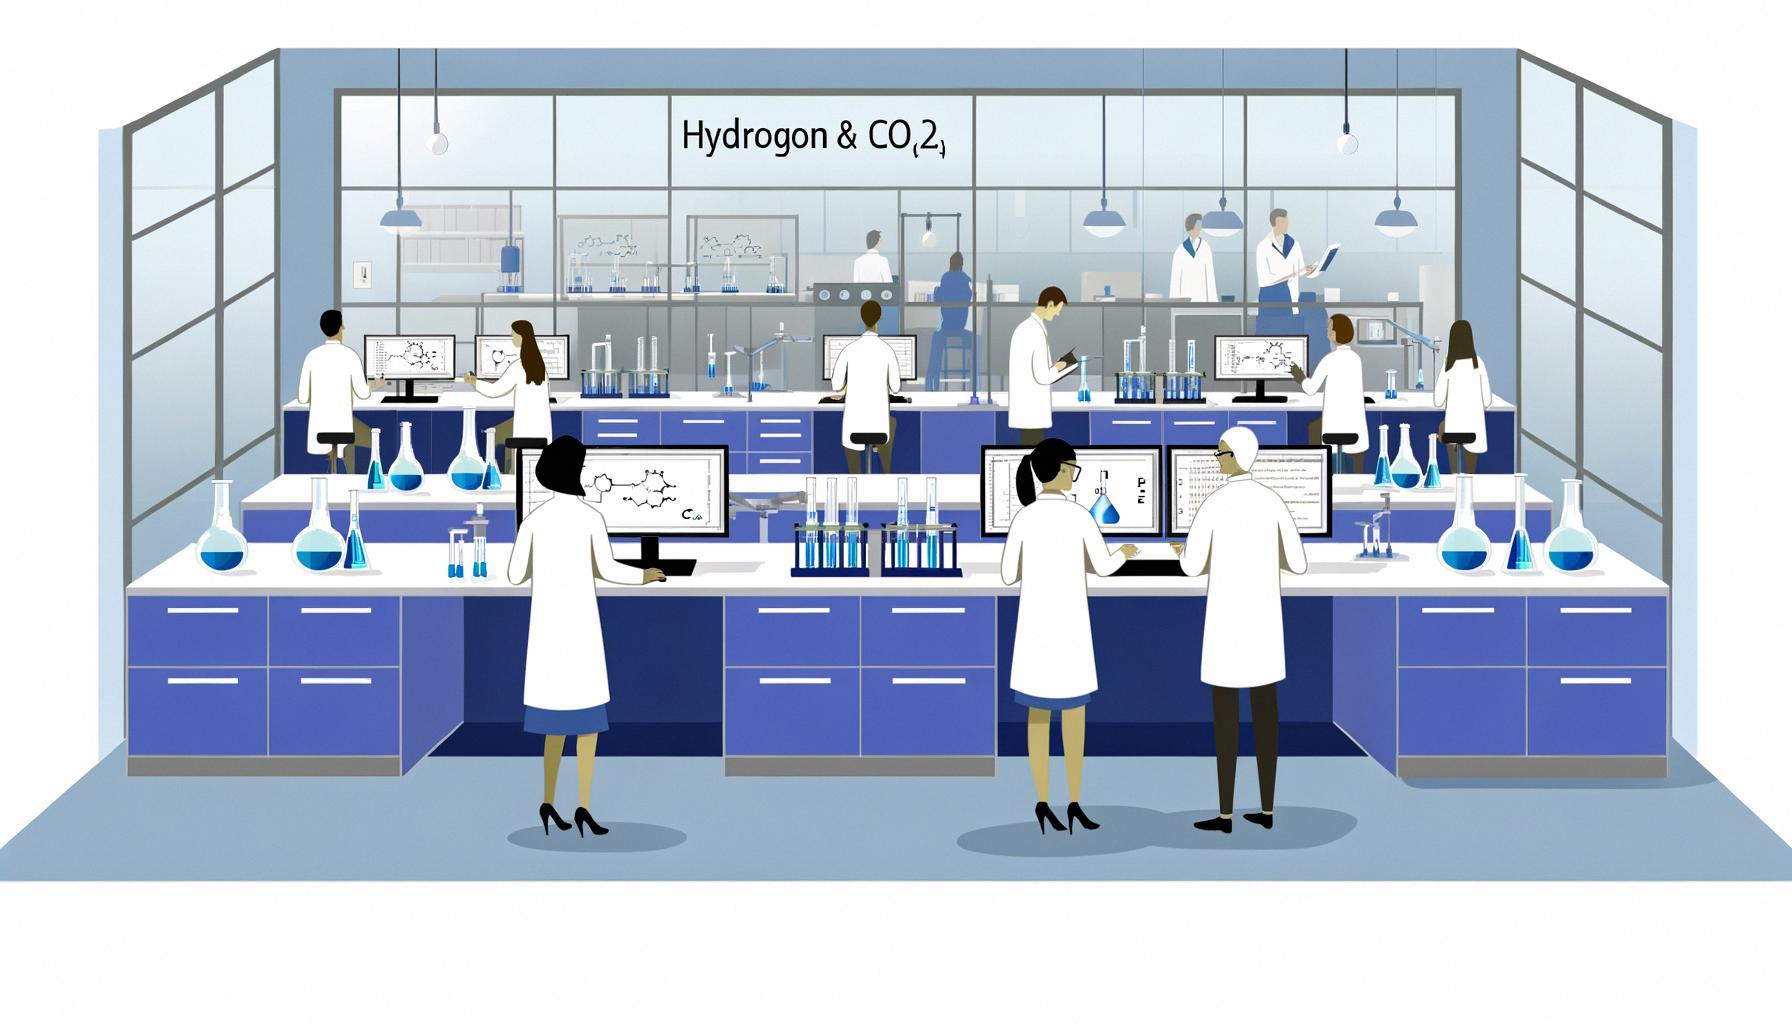 Hydrogen and CO2 research focus on energy and climate solutions